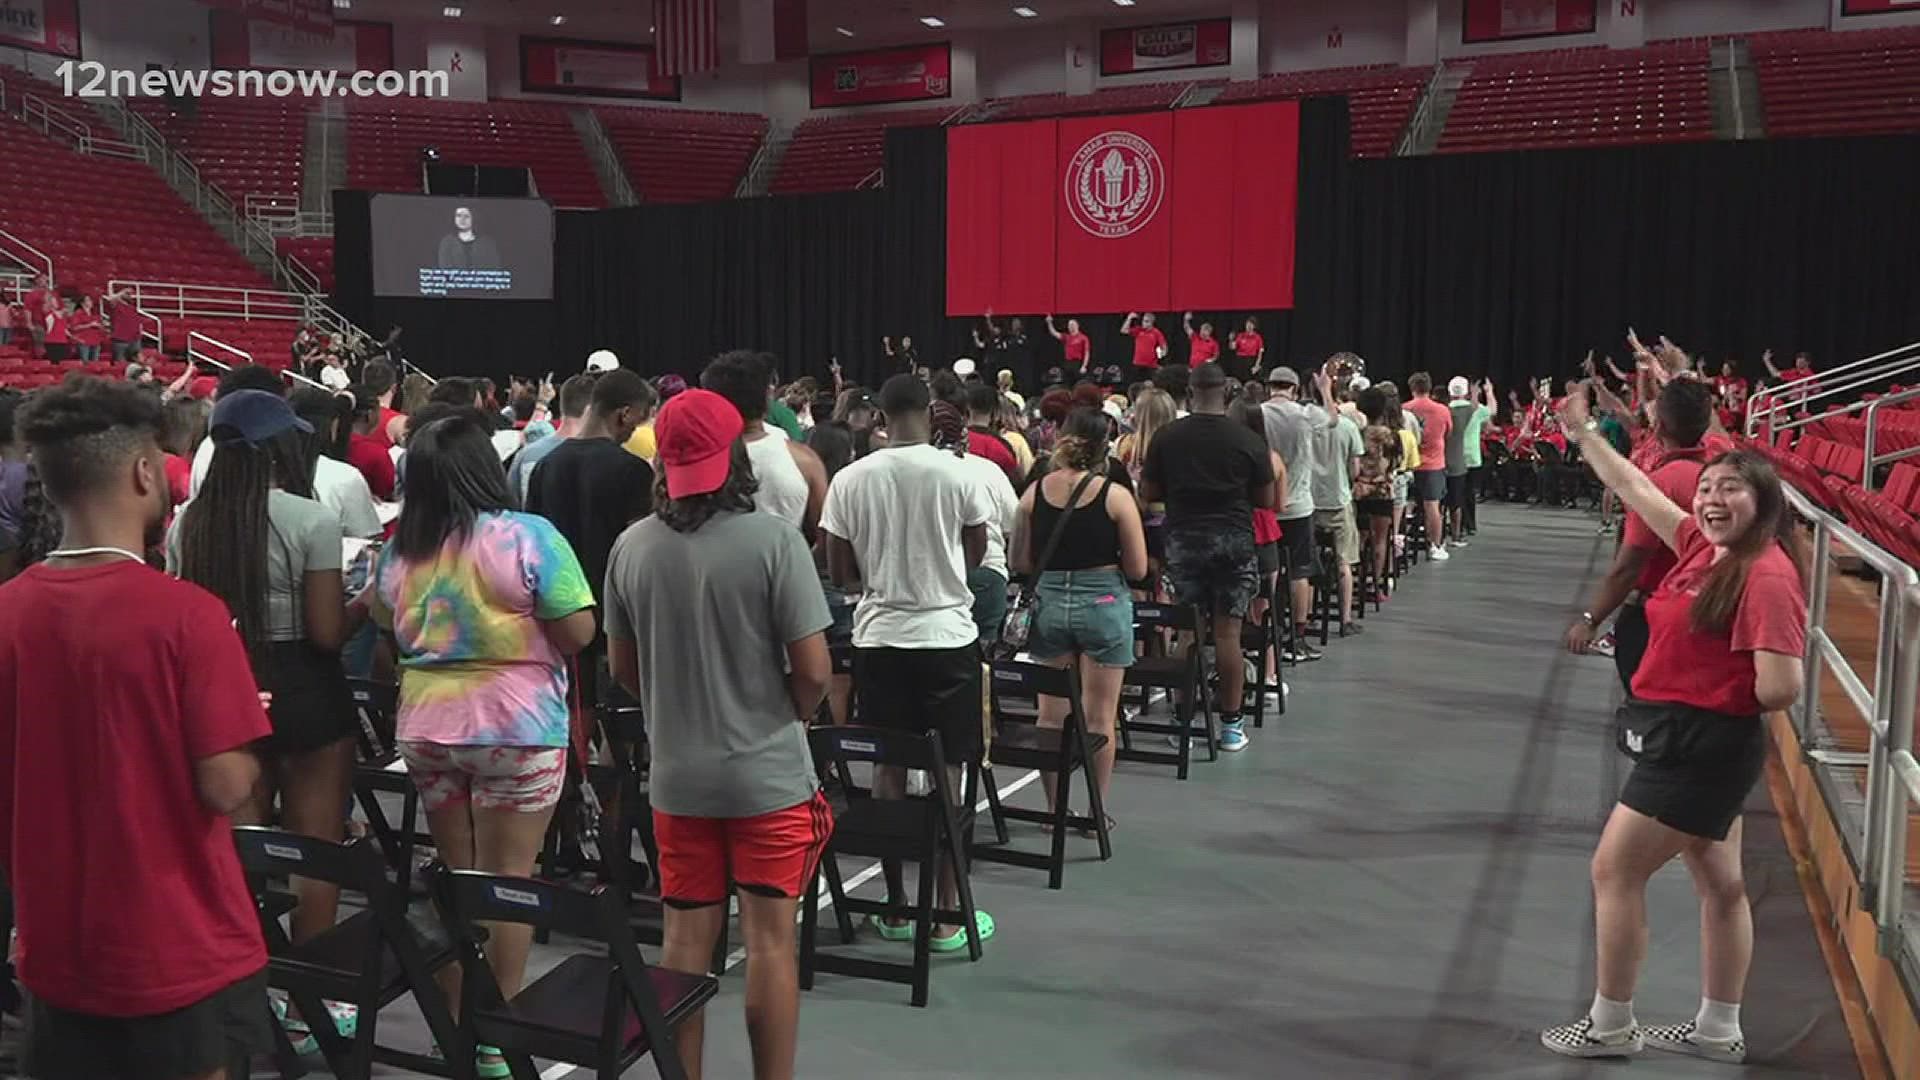 Thousands of college students will begin their freshman year at Lamar University in the middle of the COVID-19 surge.